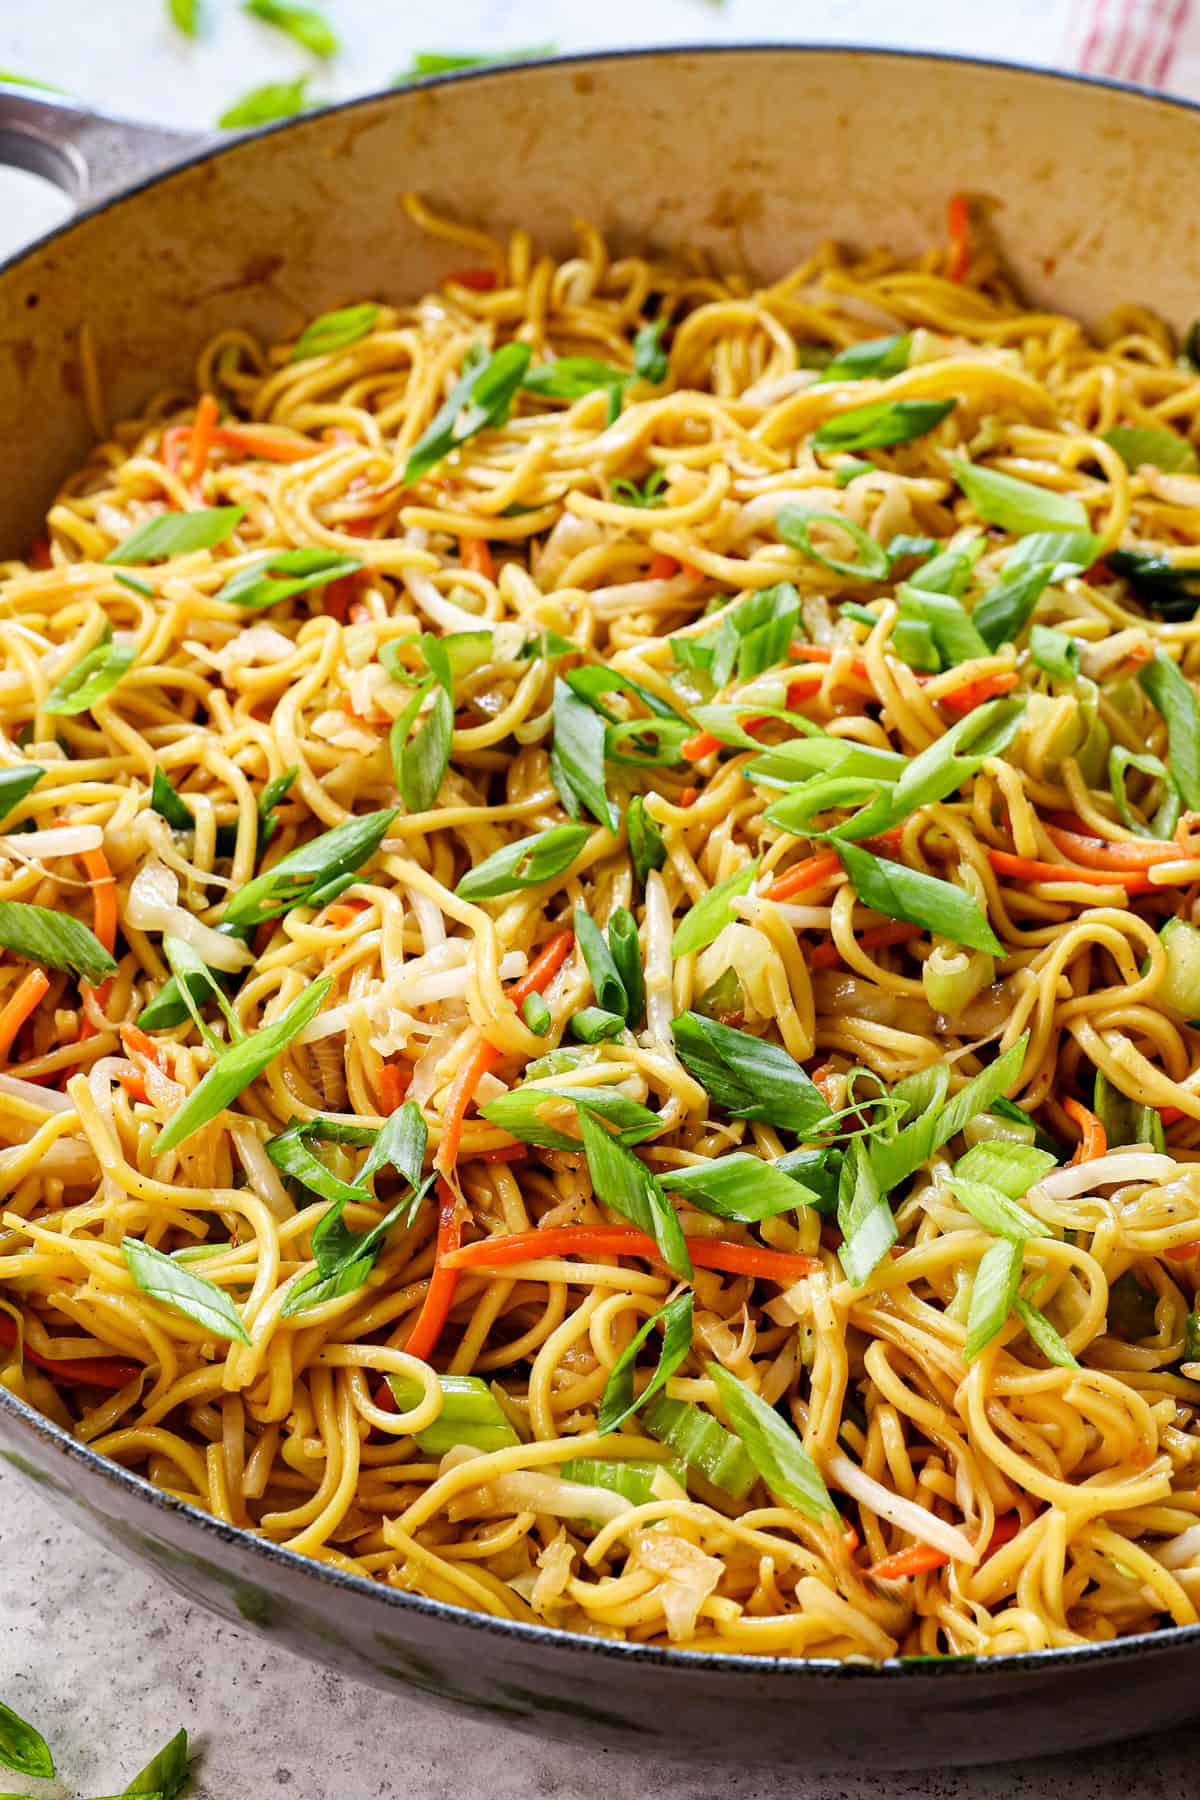 chow mein recipe made in a skillet or wok with cabbage, carrots and sprouts